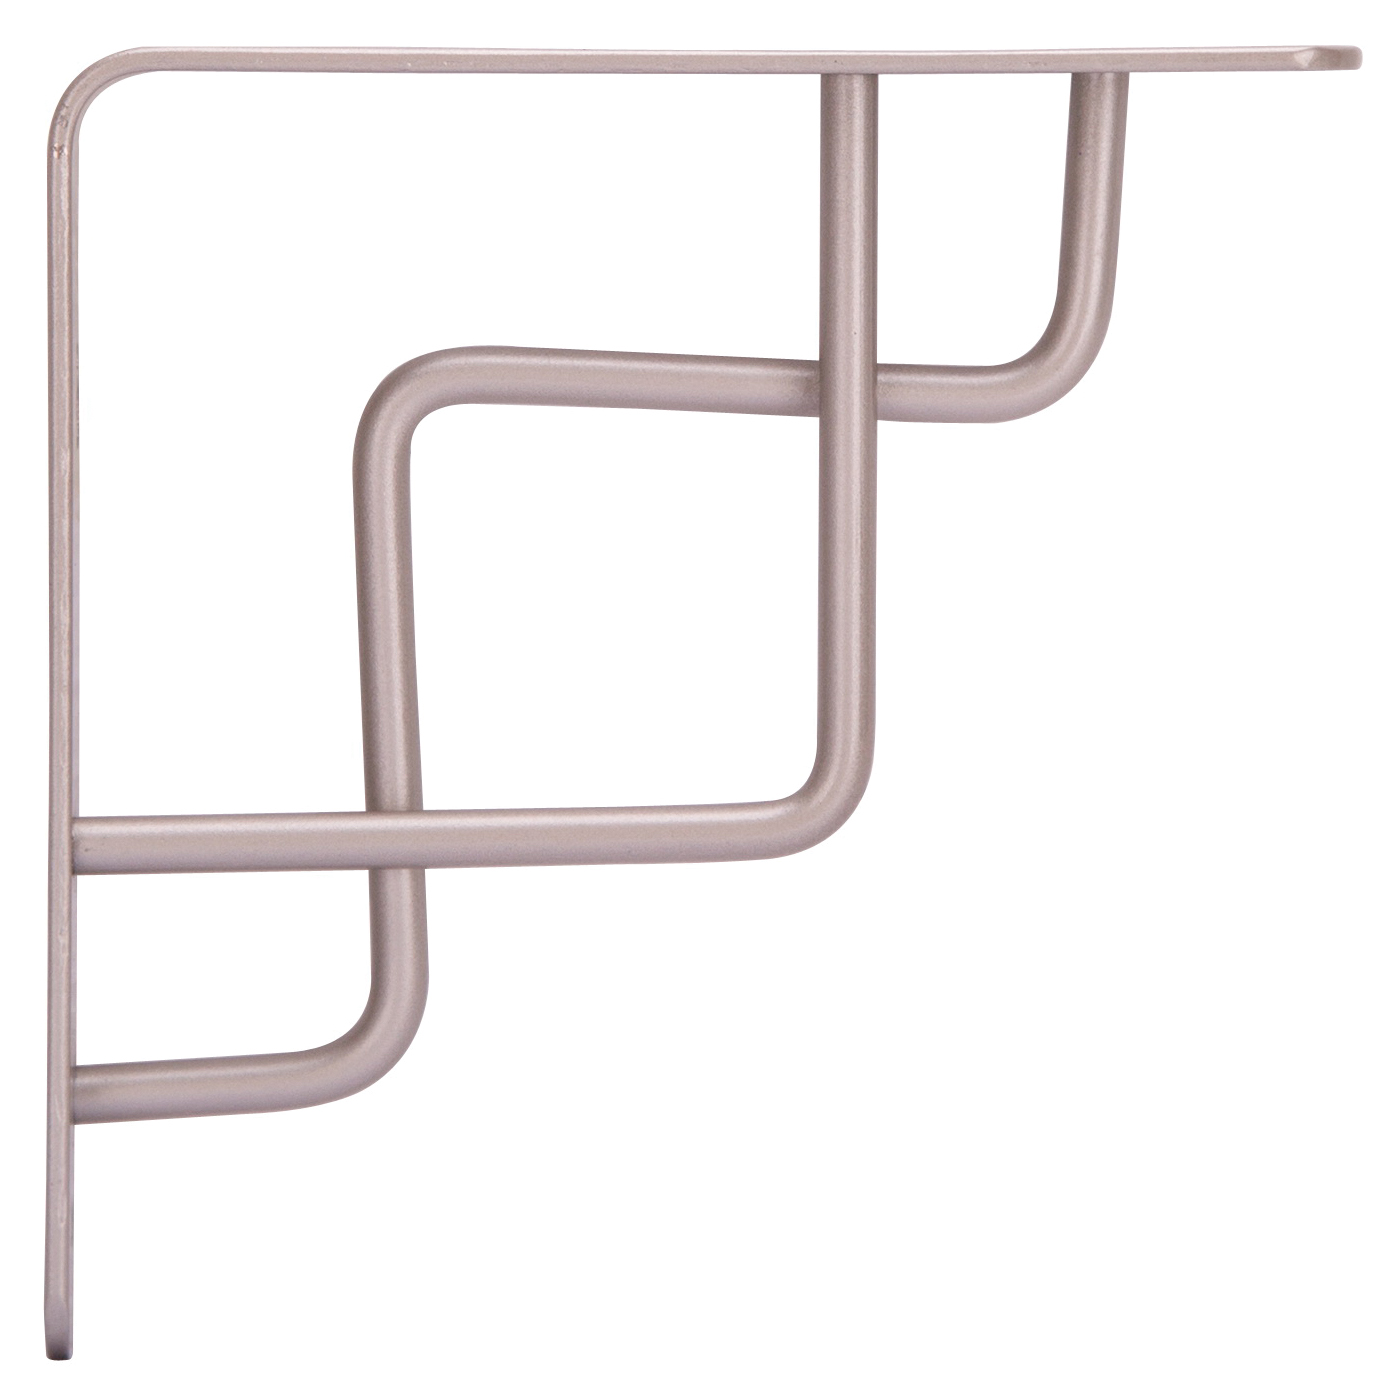 SB-025PS Contemporary and Decorative Shelf Bracket, 132 lb/Pair, 6-1/8 in L, 6-1/8 in H, Steel